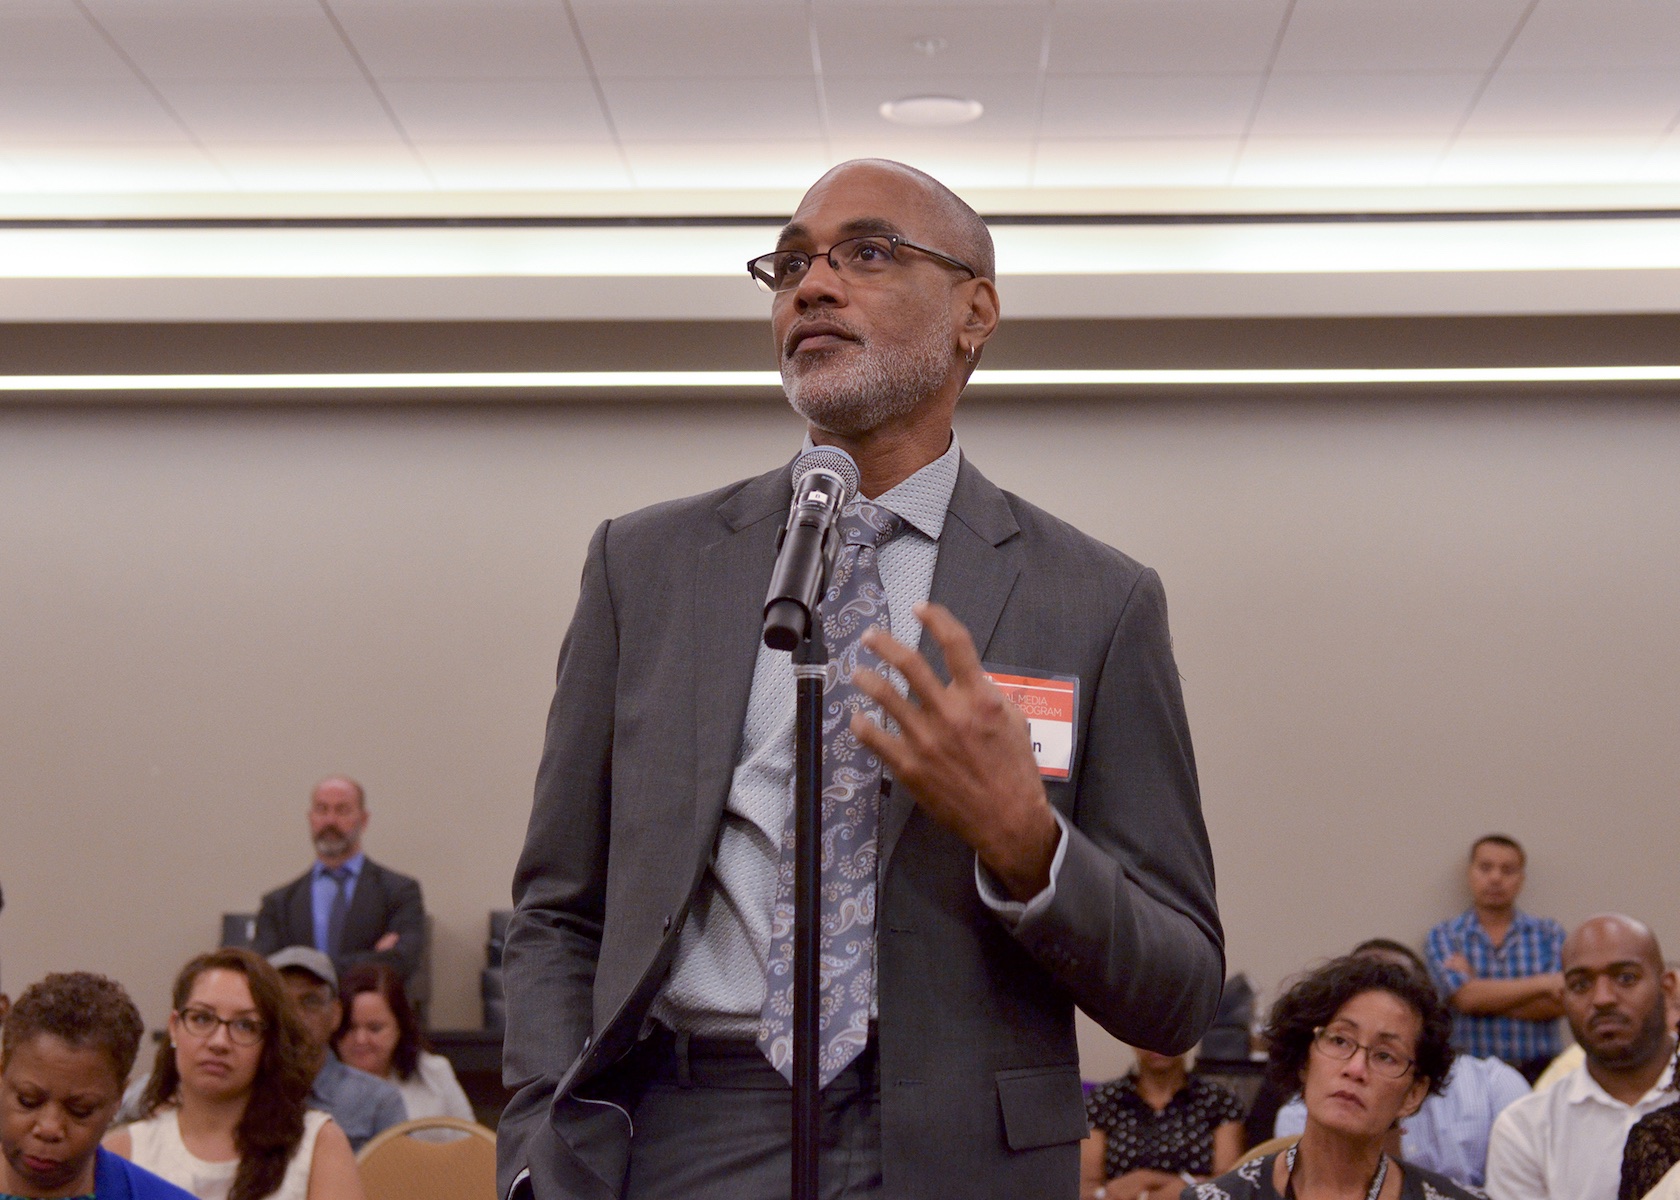 Phill Wilson, the executive director of Black AIDS Institute, asks a question during the Institute's annual PrEP Summit in Washington, D.C. (Freddie Allen/BAI)